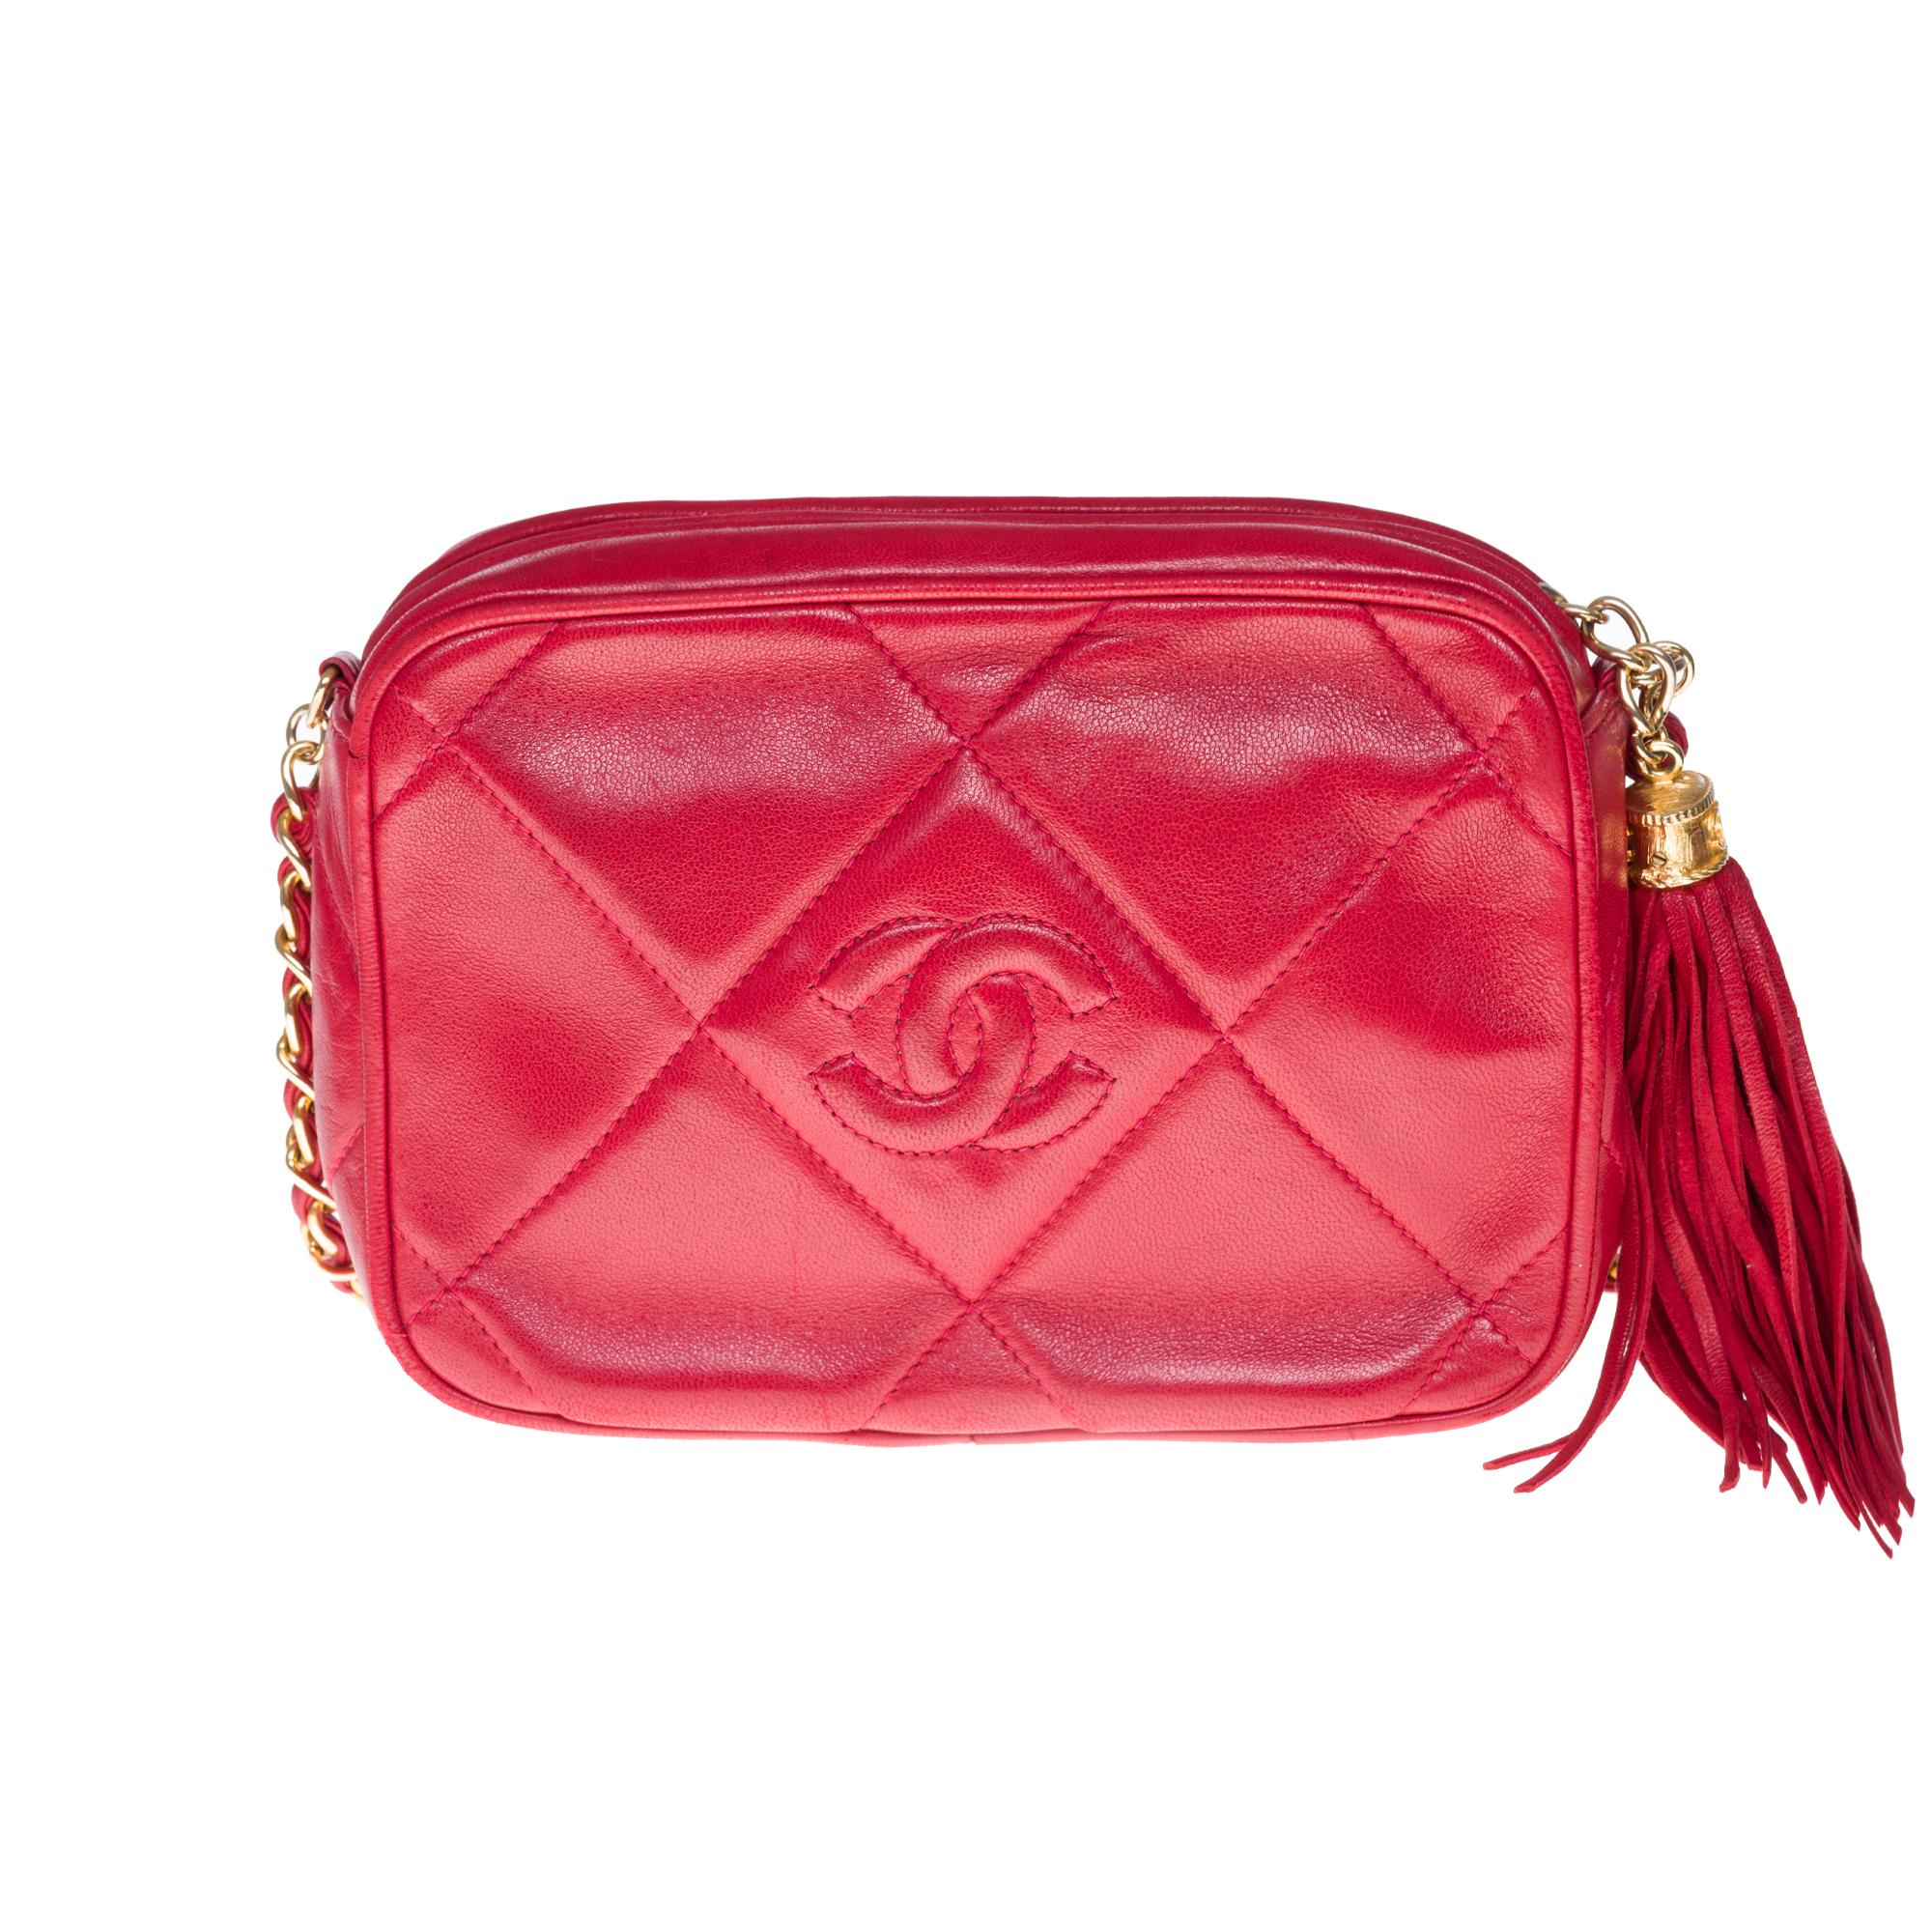 Lovely Chanel Mini Camera bag in red quilted leather, gold-tone metal hardware, gold-tone metal chain handle intertwined with red leather for a shoulder or shoulder strap.
* Zip fastening from the top, red leather fringe charm on the closure